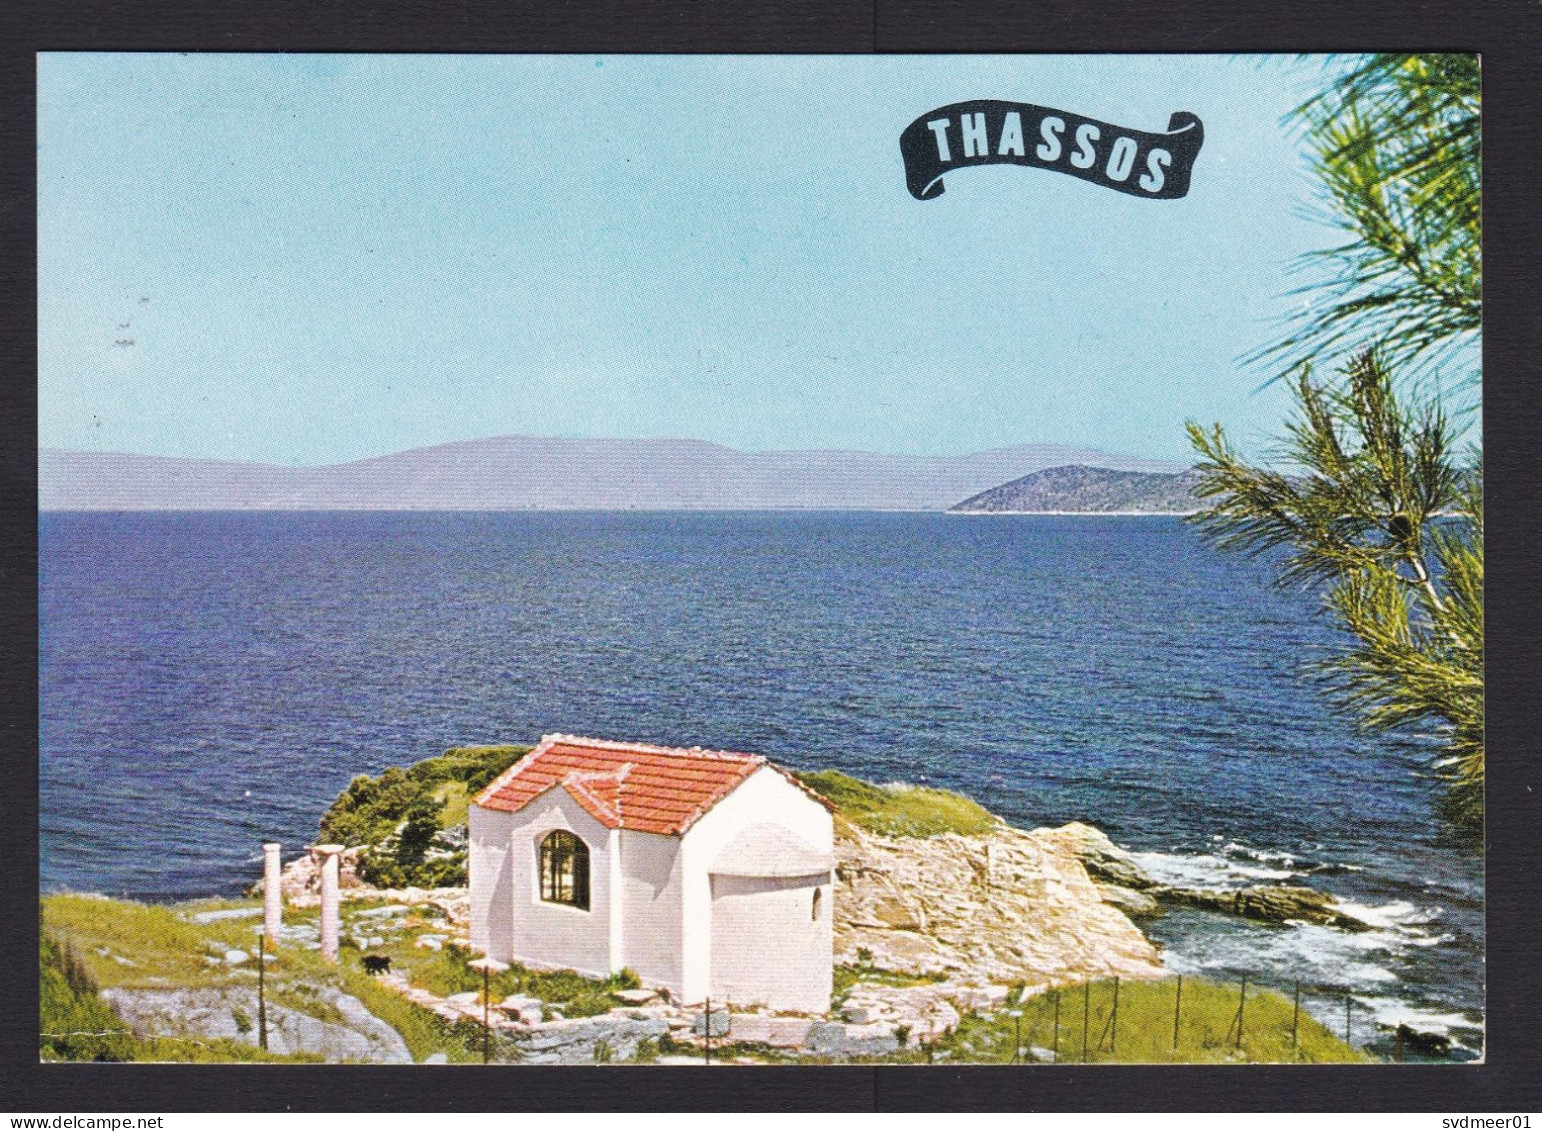 Greece: Picture Postcard To Netherlands, 2000s, 2 Stamps, Firefighter Airplane, Fire, Rainbow, Thassos (traces Of Use) - Lettres & Documents